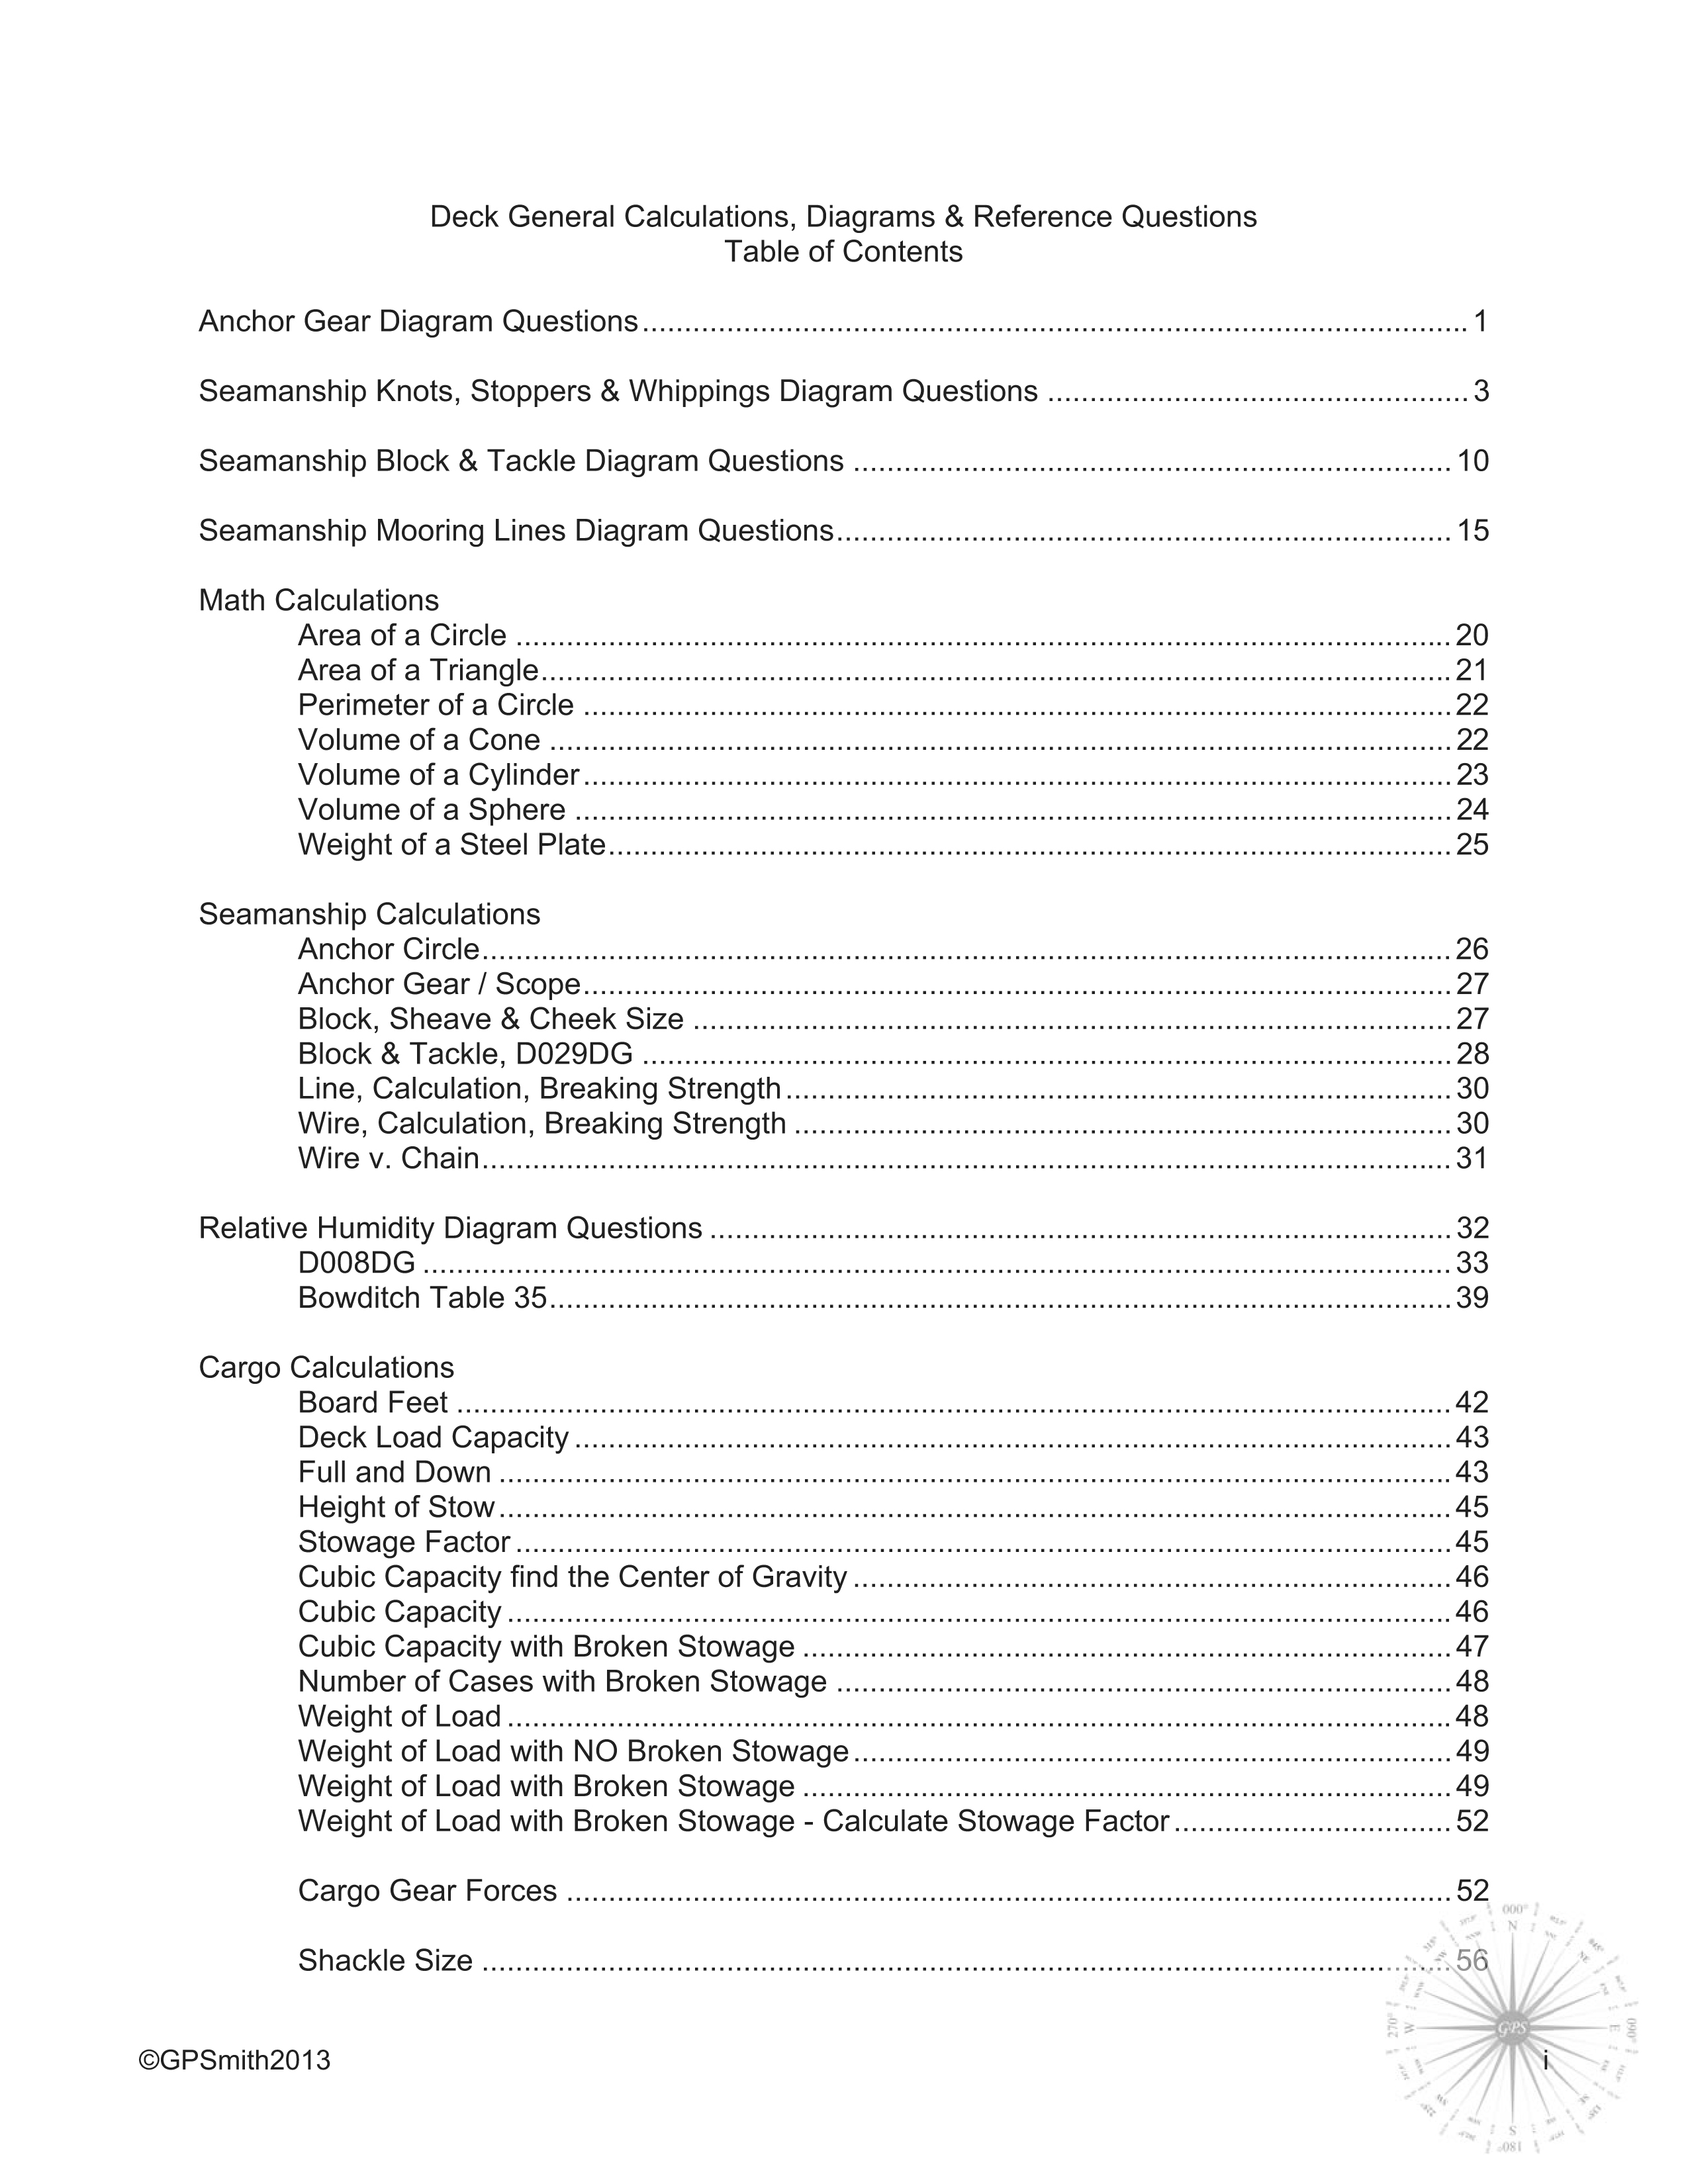 Table of Contents 1